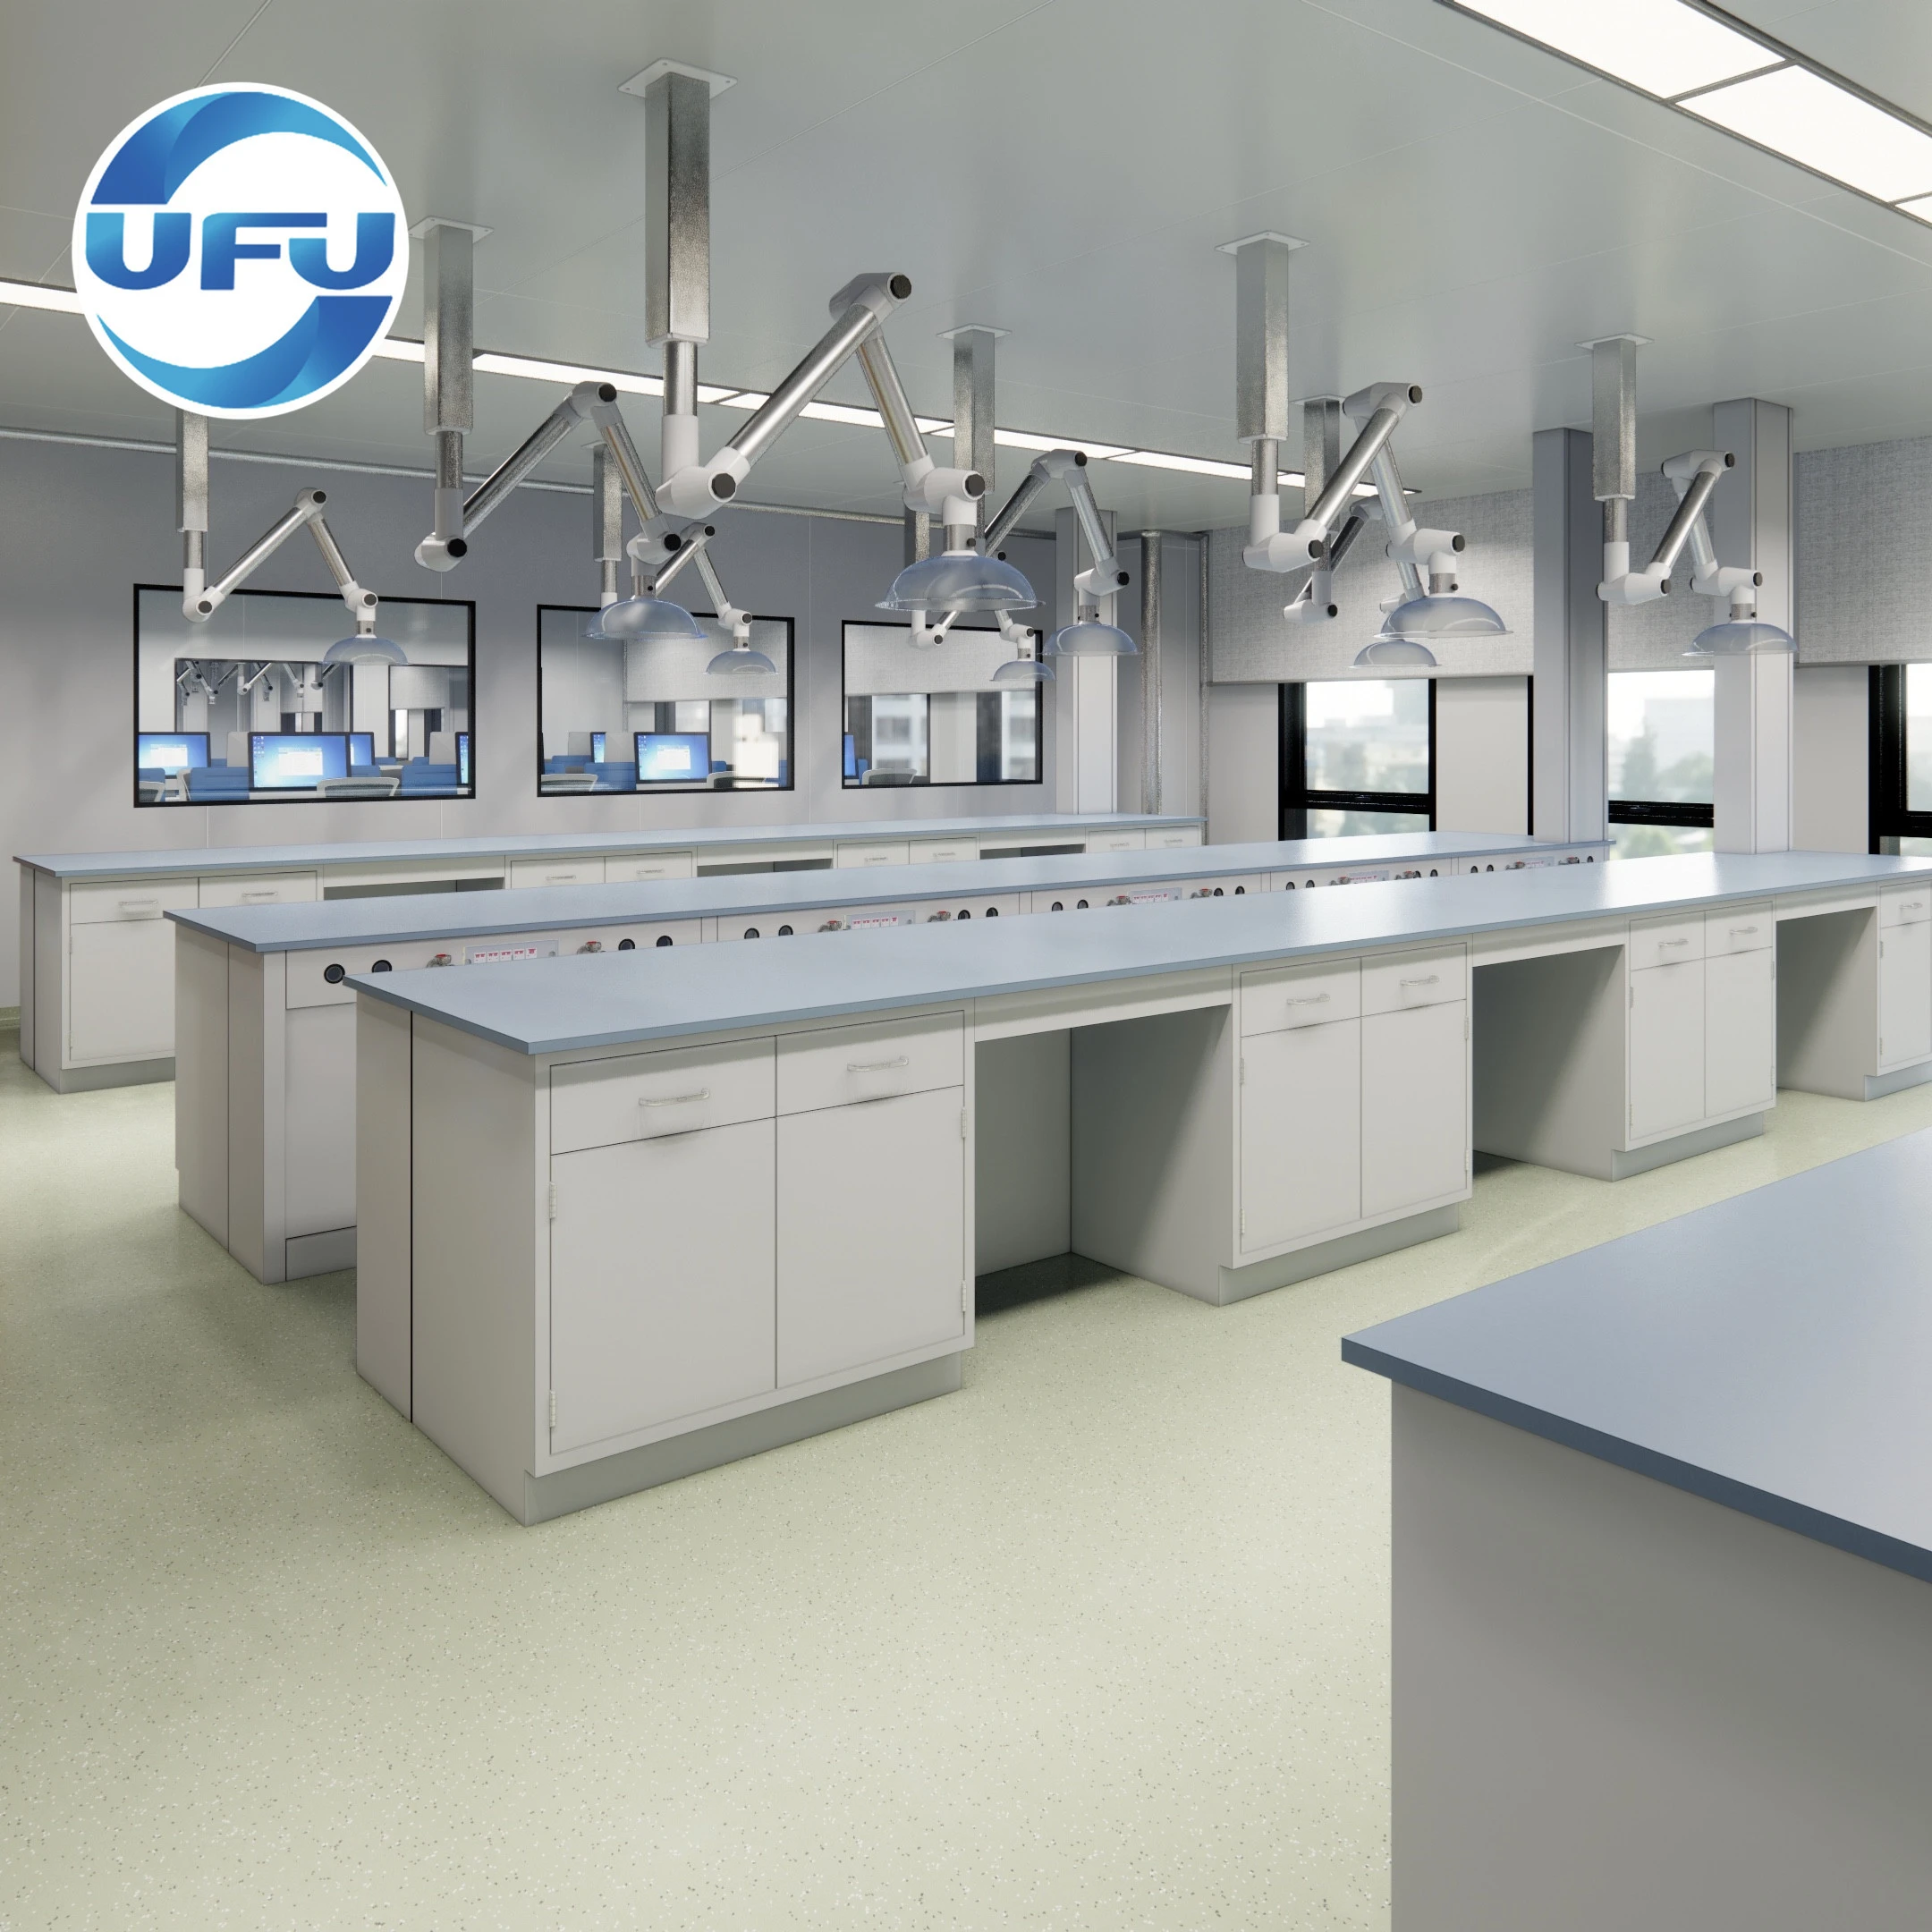 SEFA  Approved  Steel Lab Furniture  Physical  Instrument  Workbench